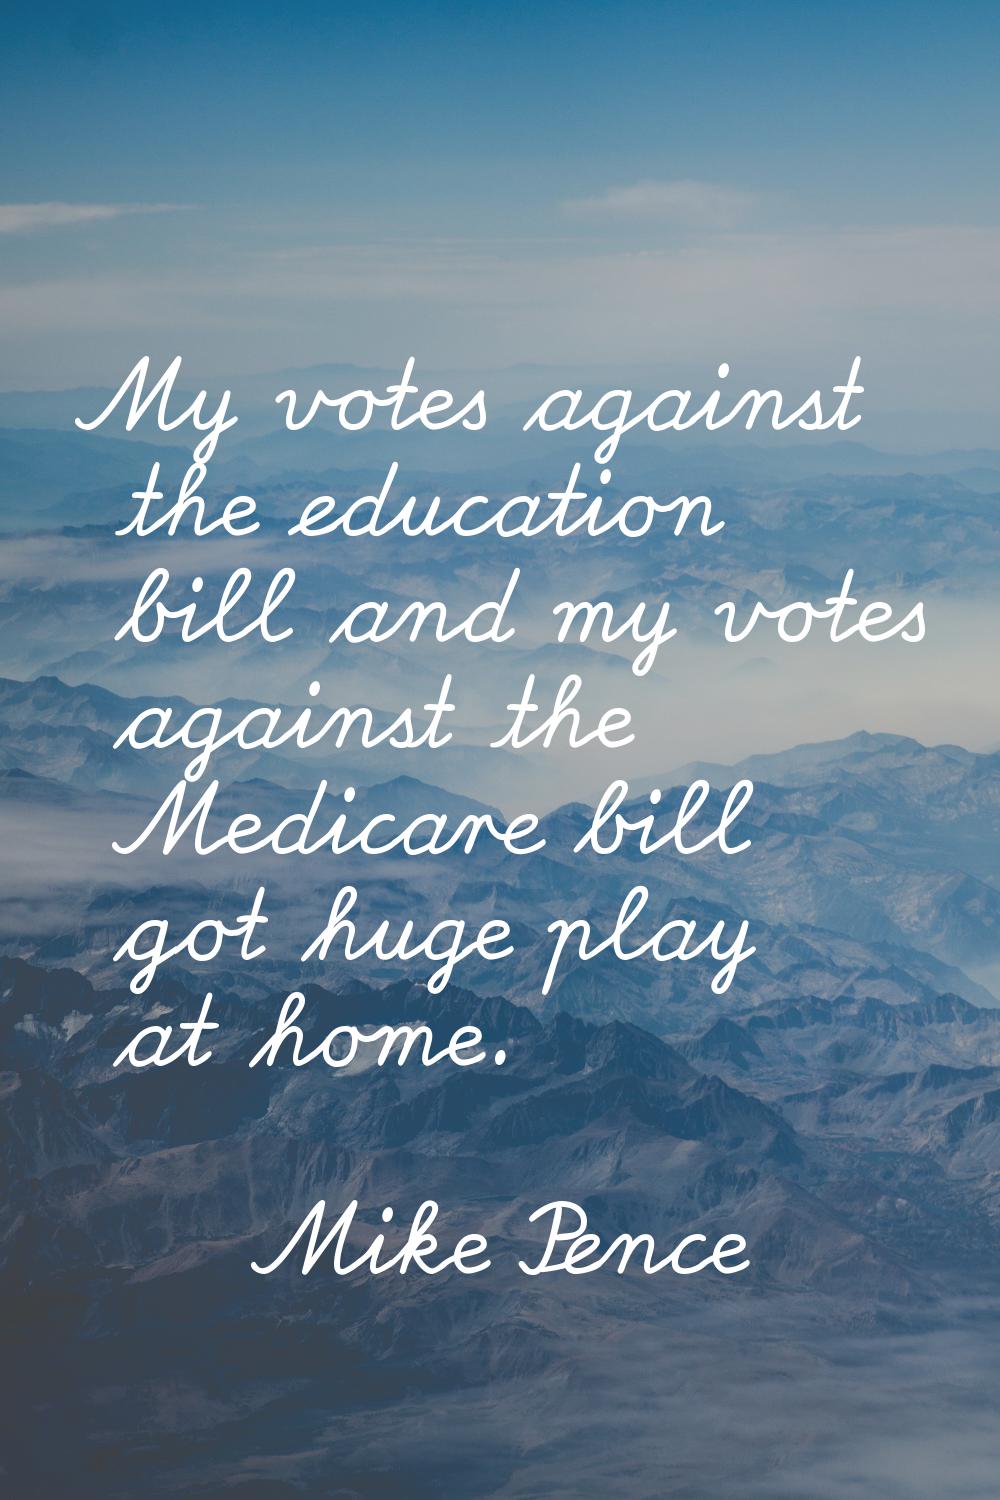 My votes against the education bill and my votes against the Medicare bill got huge play at home.